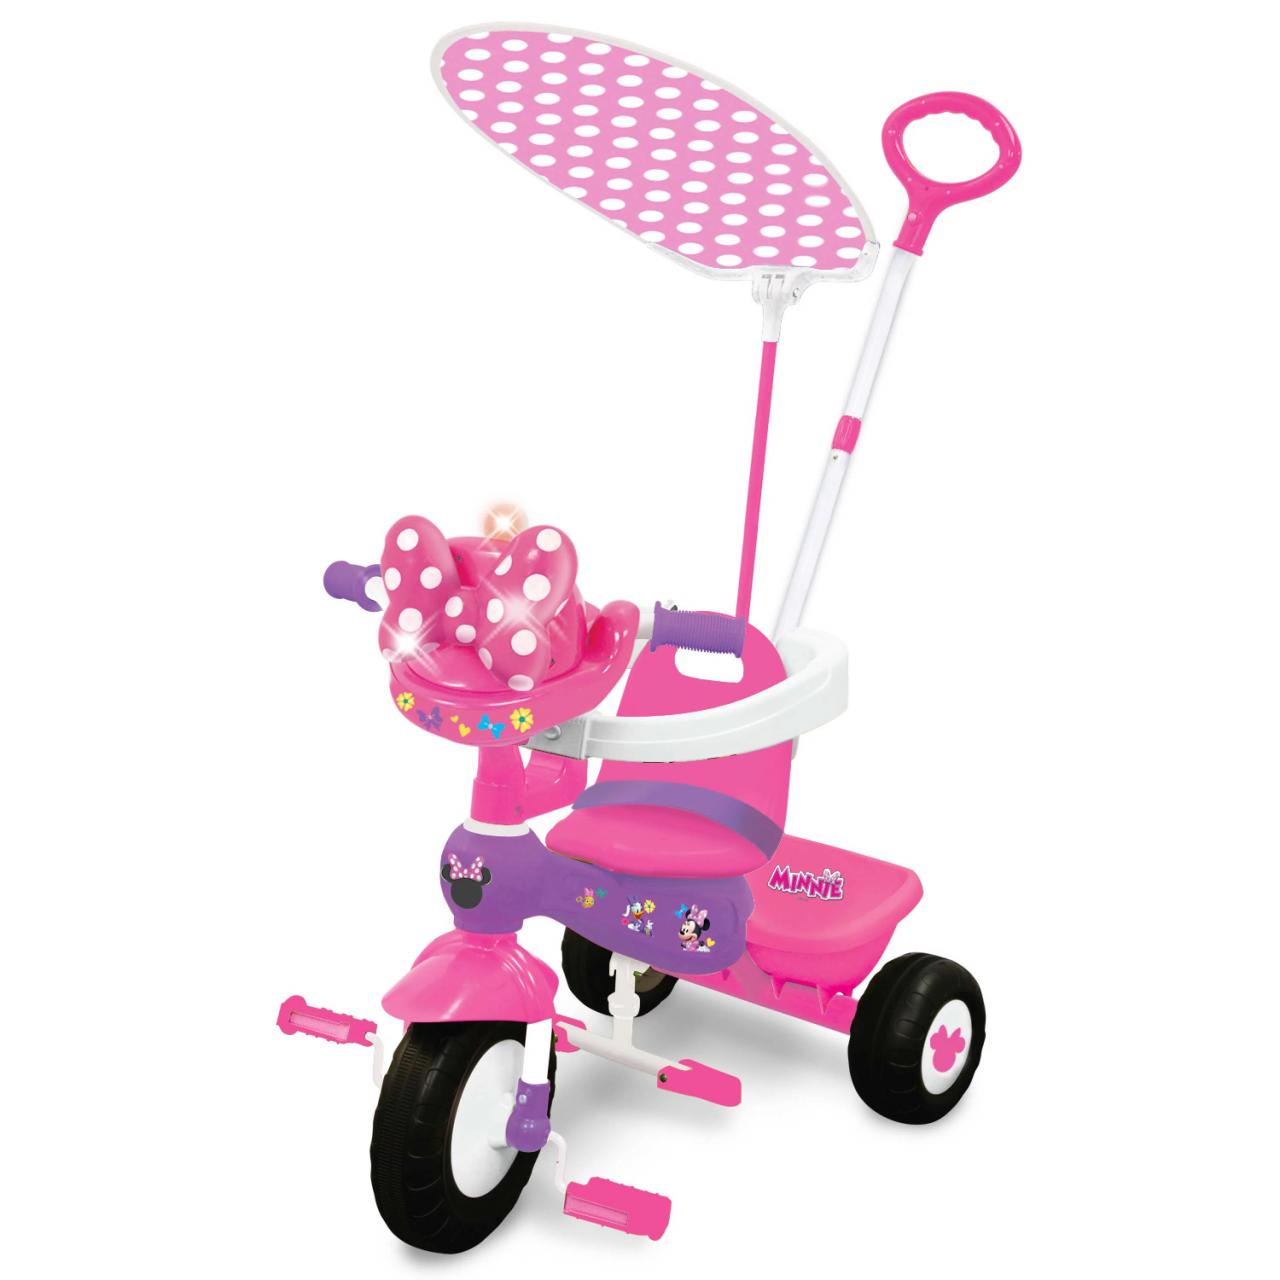 Disney Minnie Mouse Deluxe Trike RideOn with Lights and Sounds